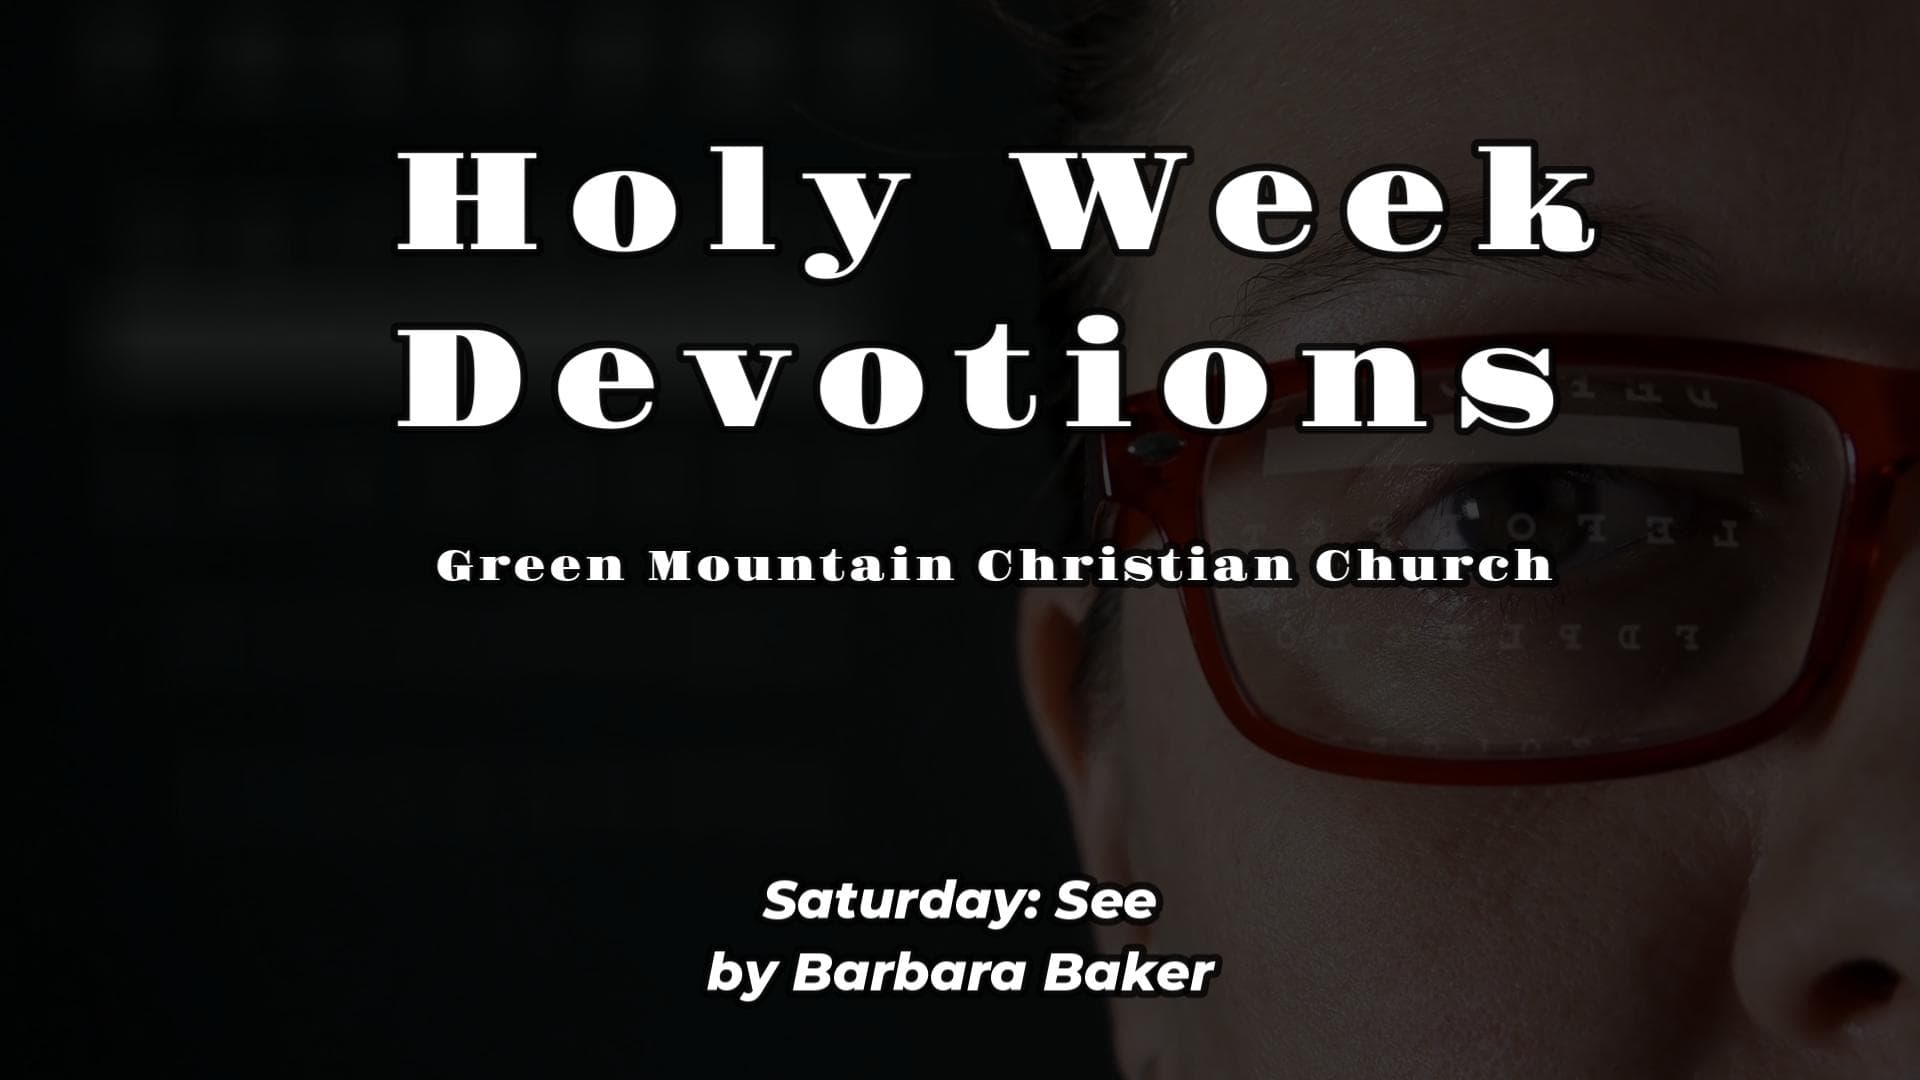 In the background is a man with glasses looking ahead with a vision chart to his left, in the foreground is the caption "Holy Week Devotions - Green Mountain Christian Church - Saturday - See by Barbara Baker